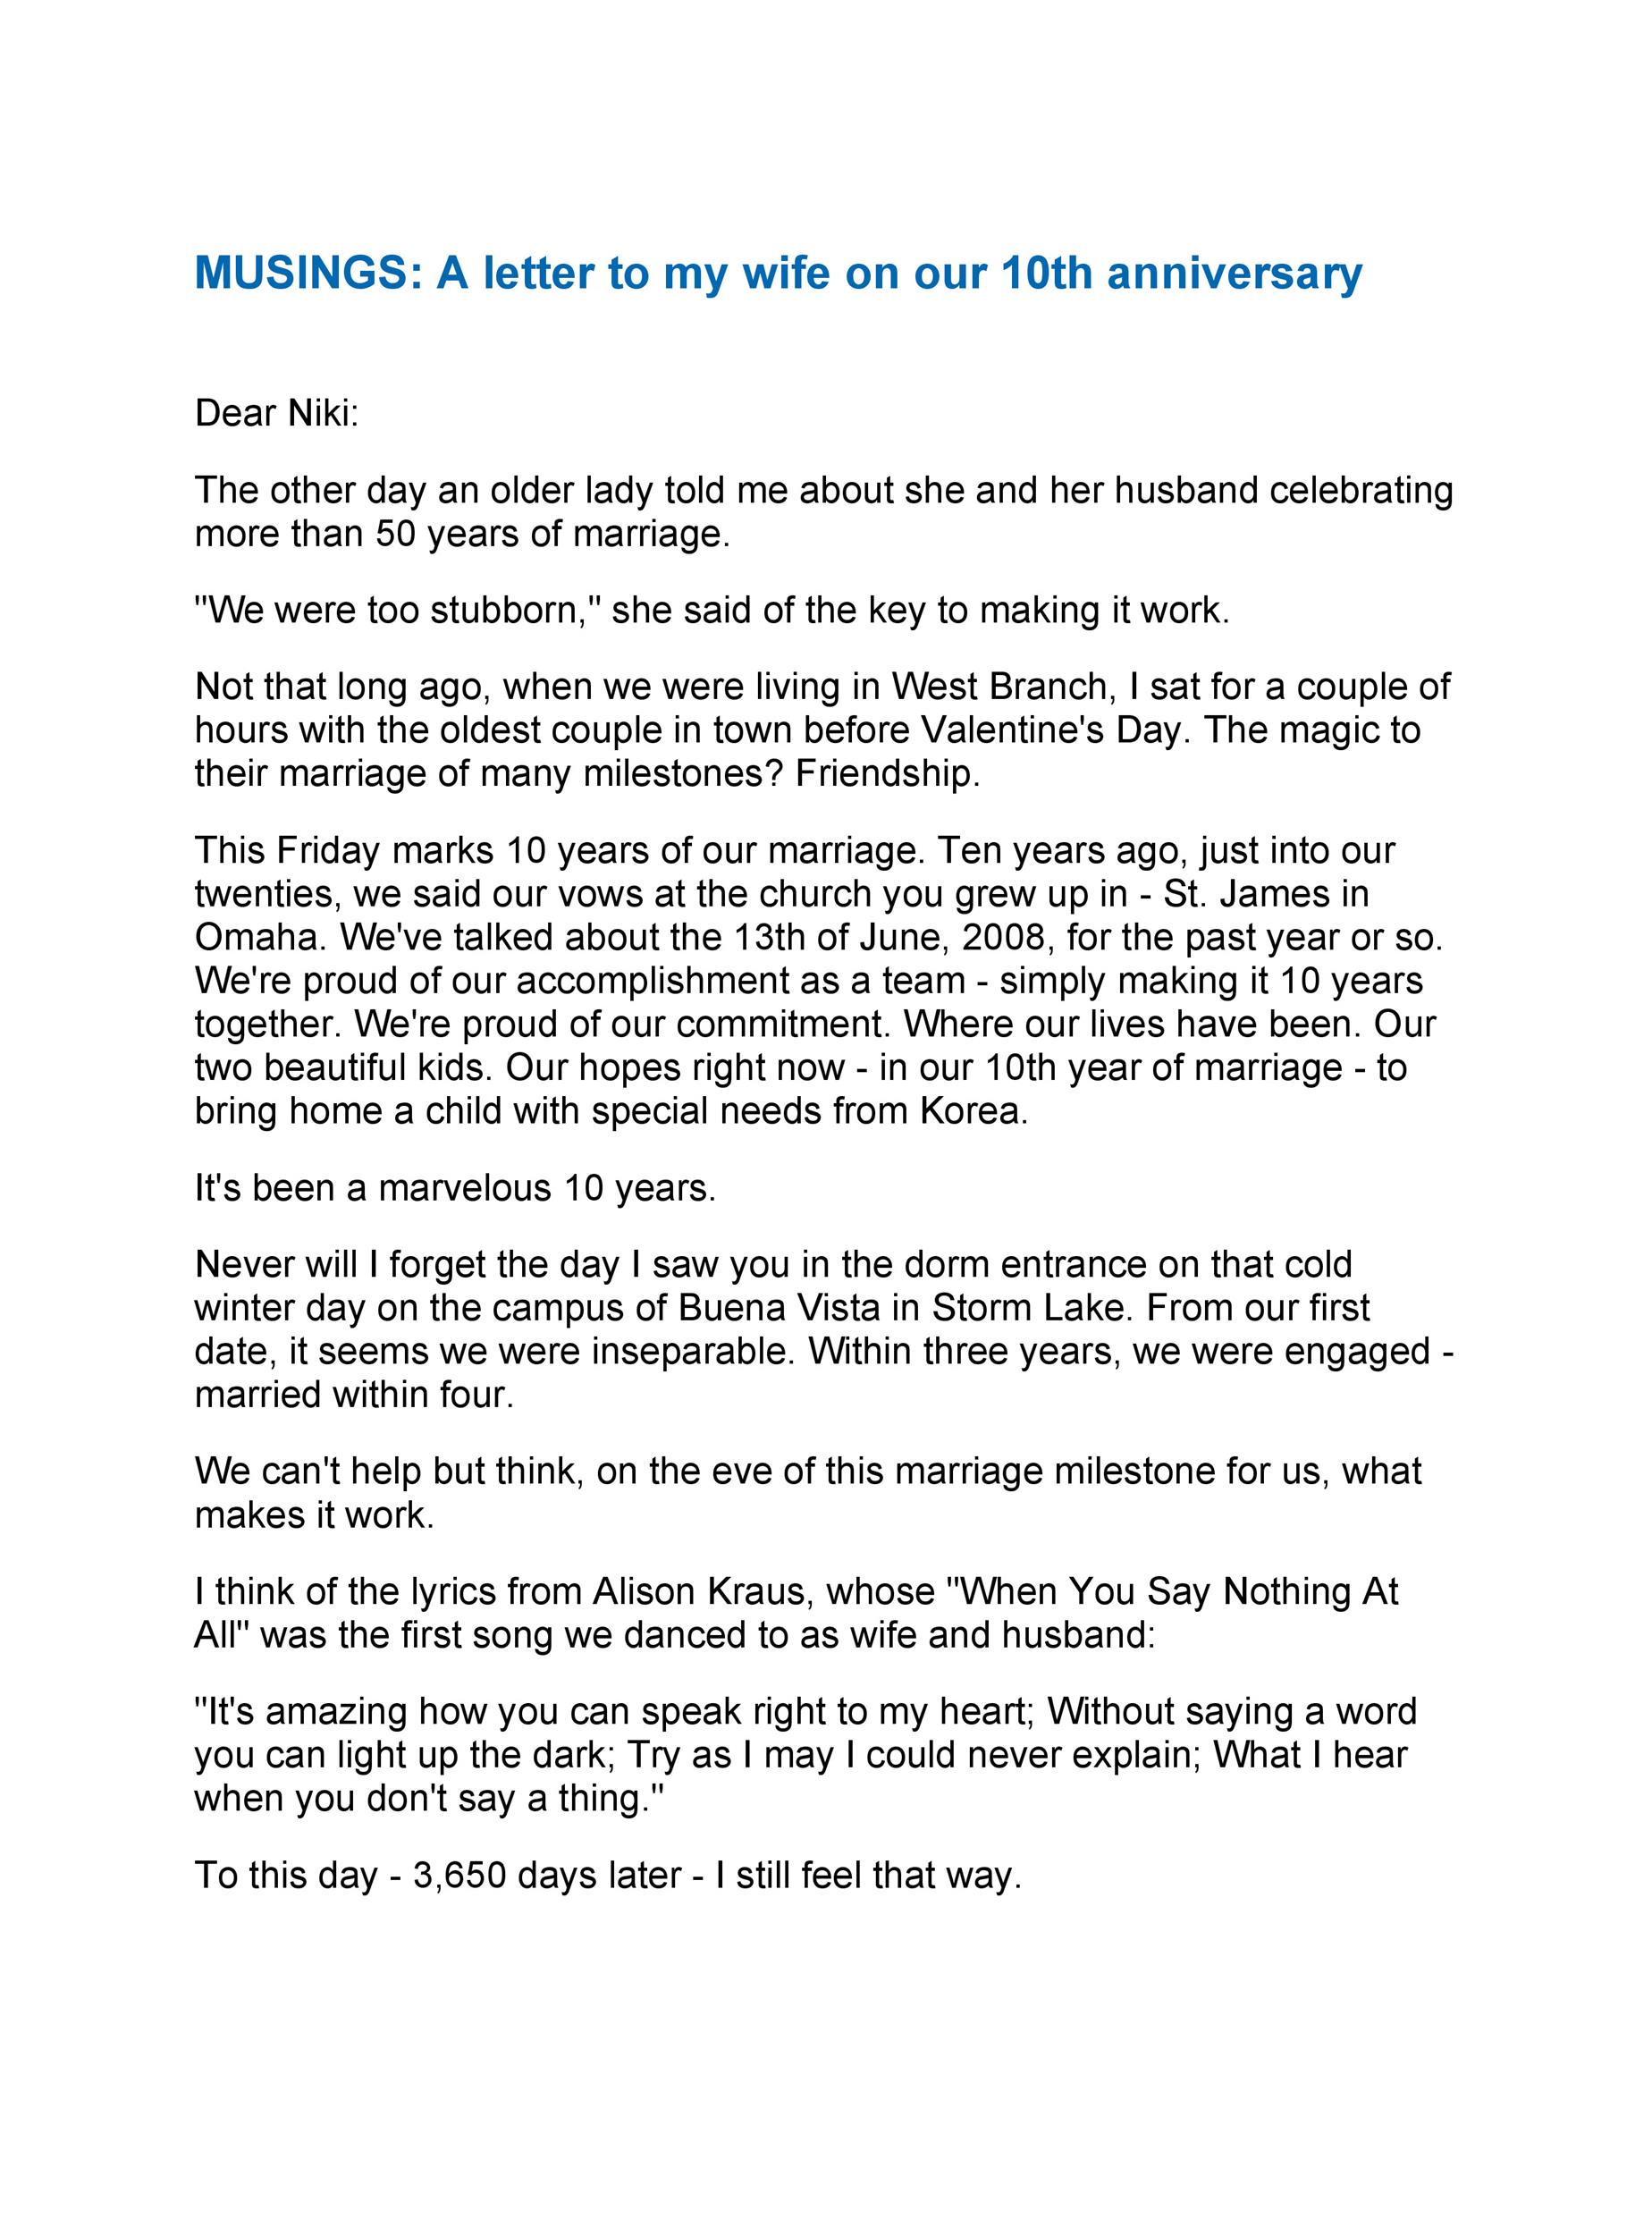 10th anniversary letter to wife